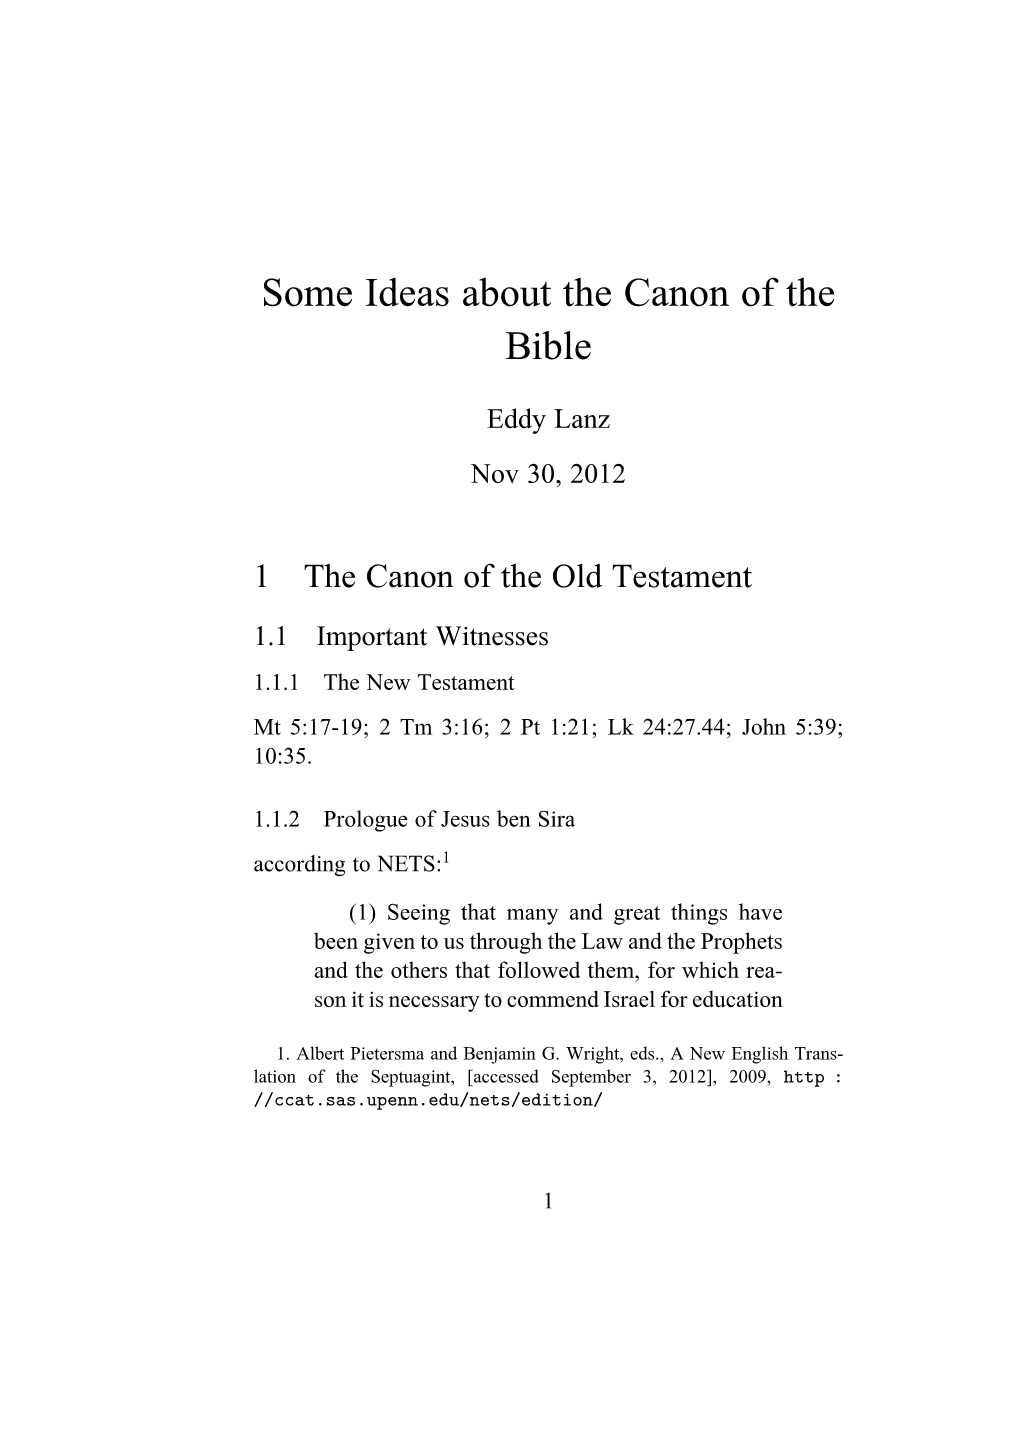 Some Ideas About the Canon of the Bible